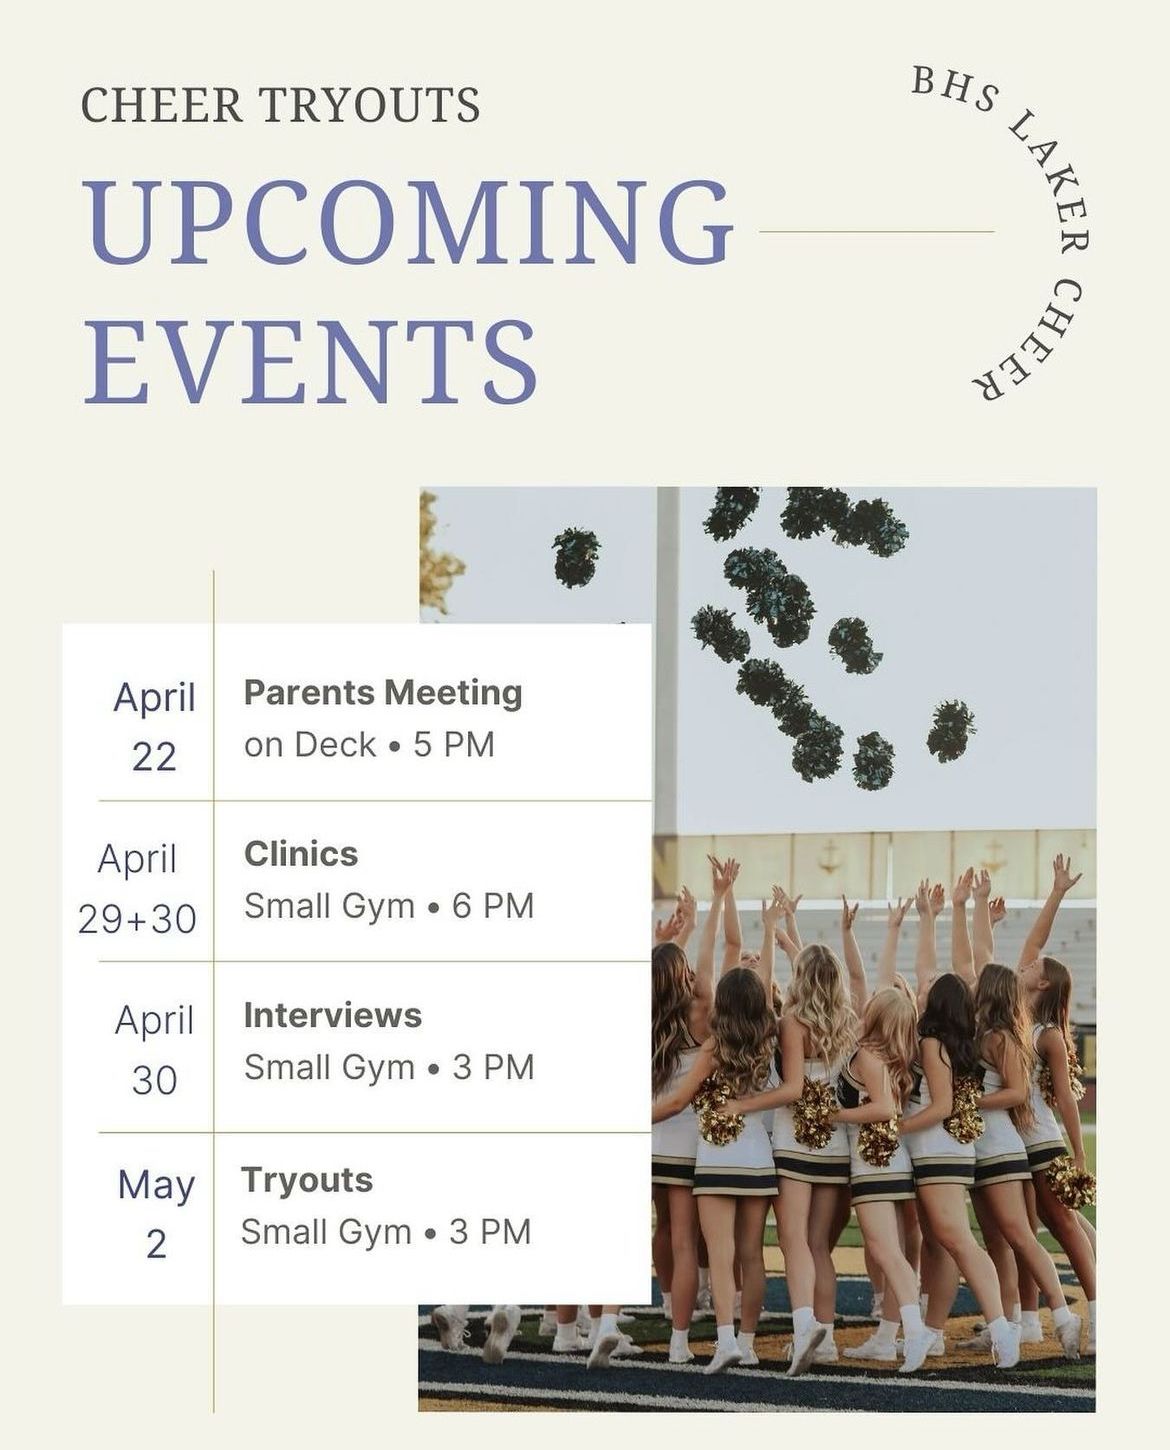 Cheer Tryouts, April 22: Parents Meeting on Deck at 5 pm, April 29 - April 30 Clinics in Small Gym at 6 pm, April 30 Interviews Small Gym at 3 pm, May2 Tryouts in Small Gym at 3 pm.